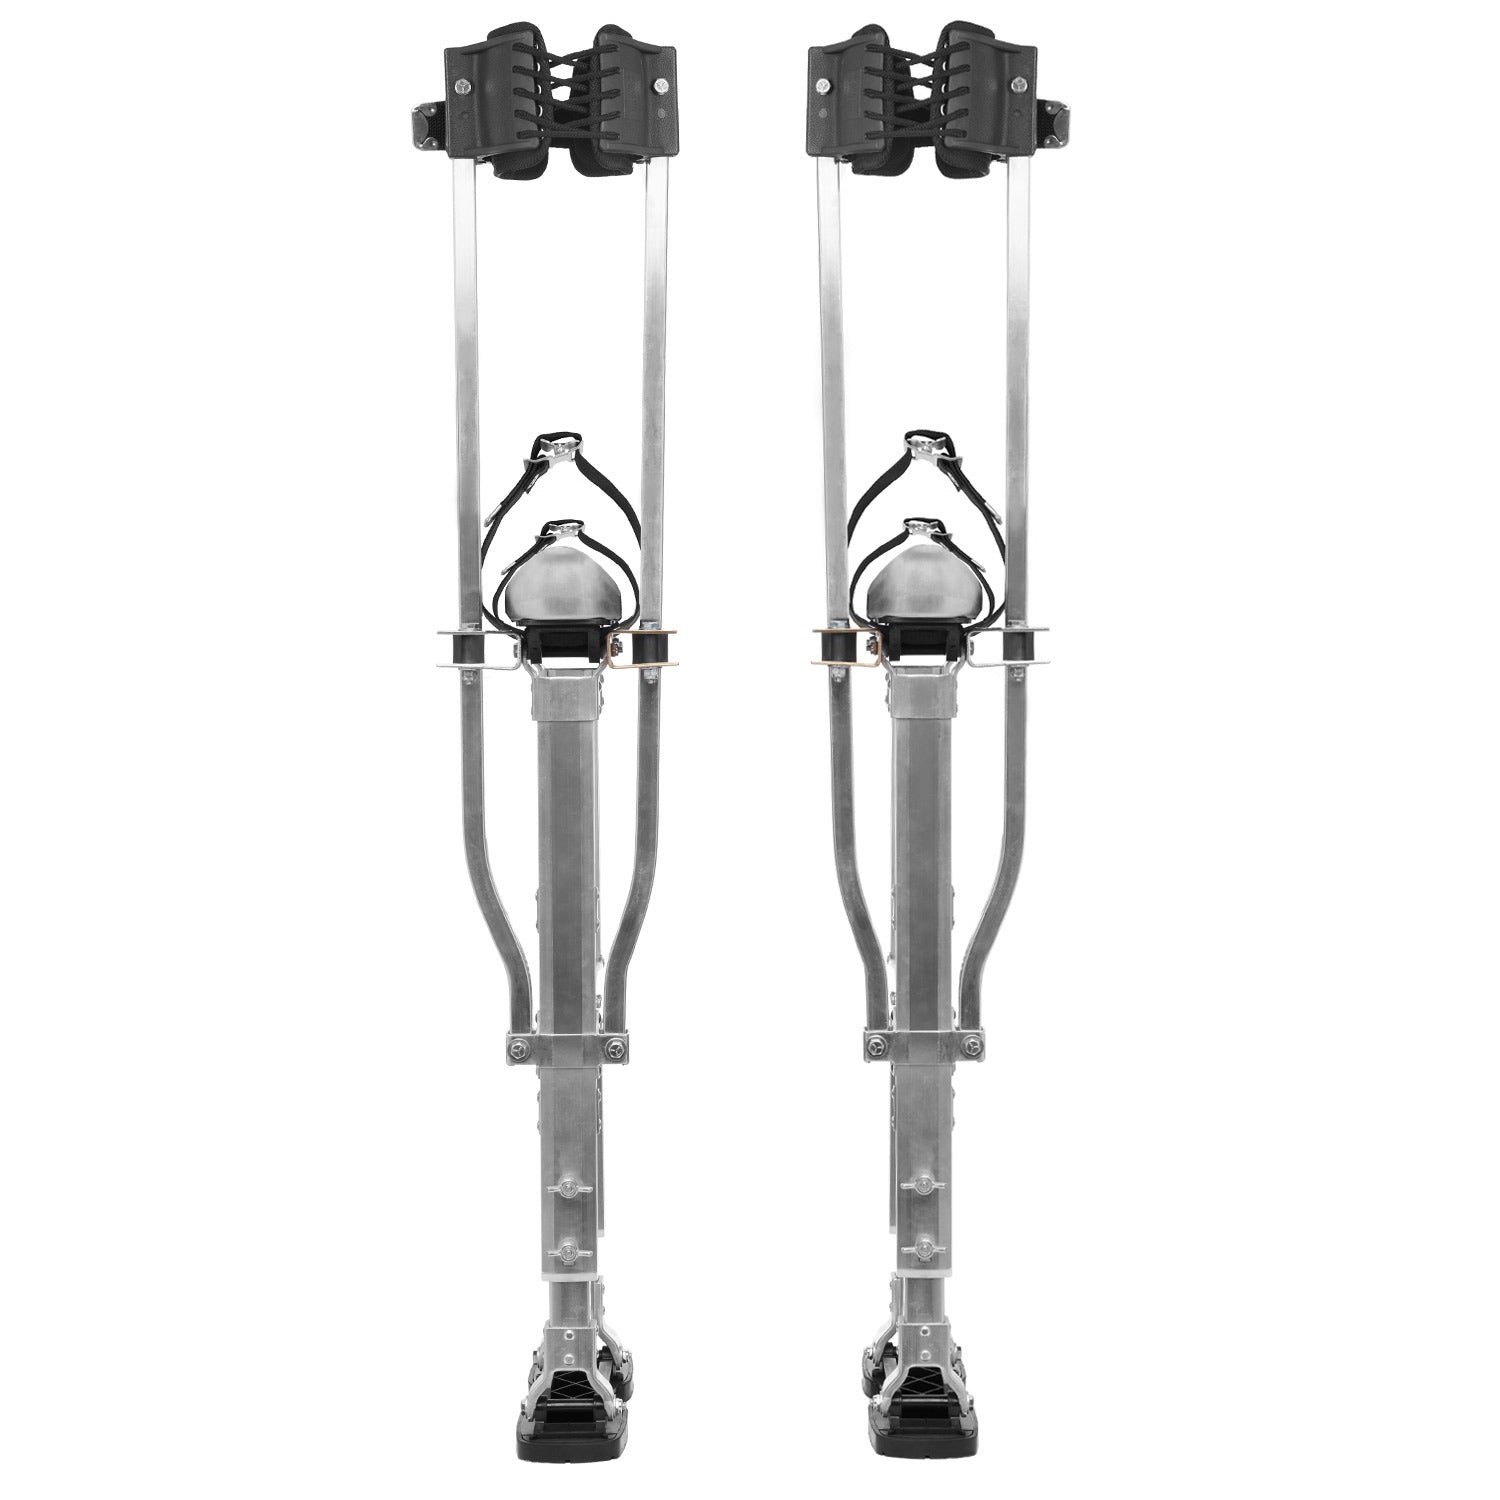 SurPro S2 Stilts raise the industry standard in the drywall stilts category